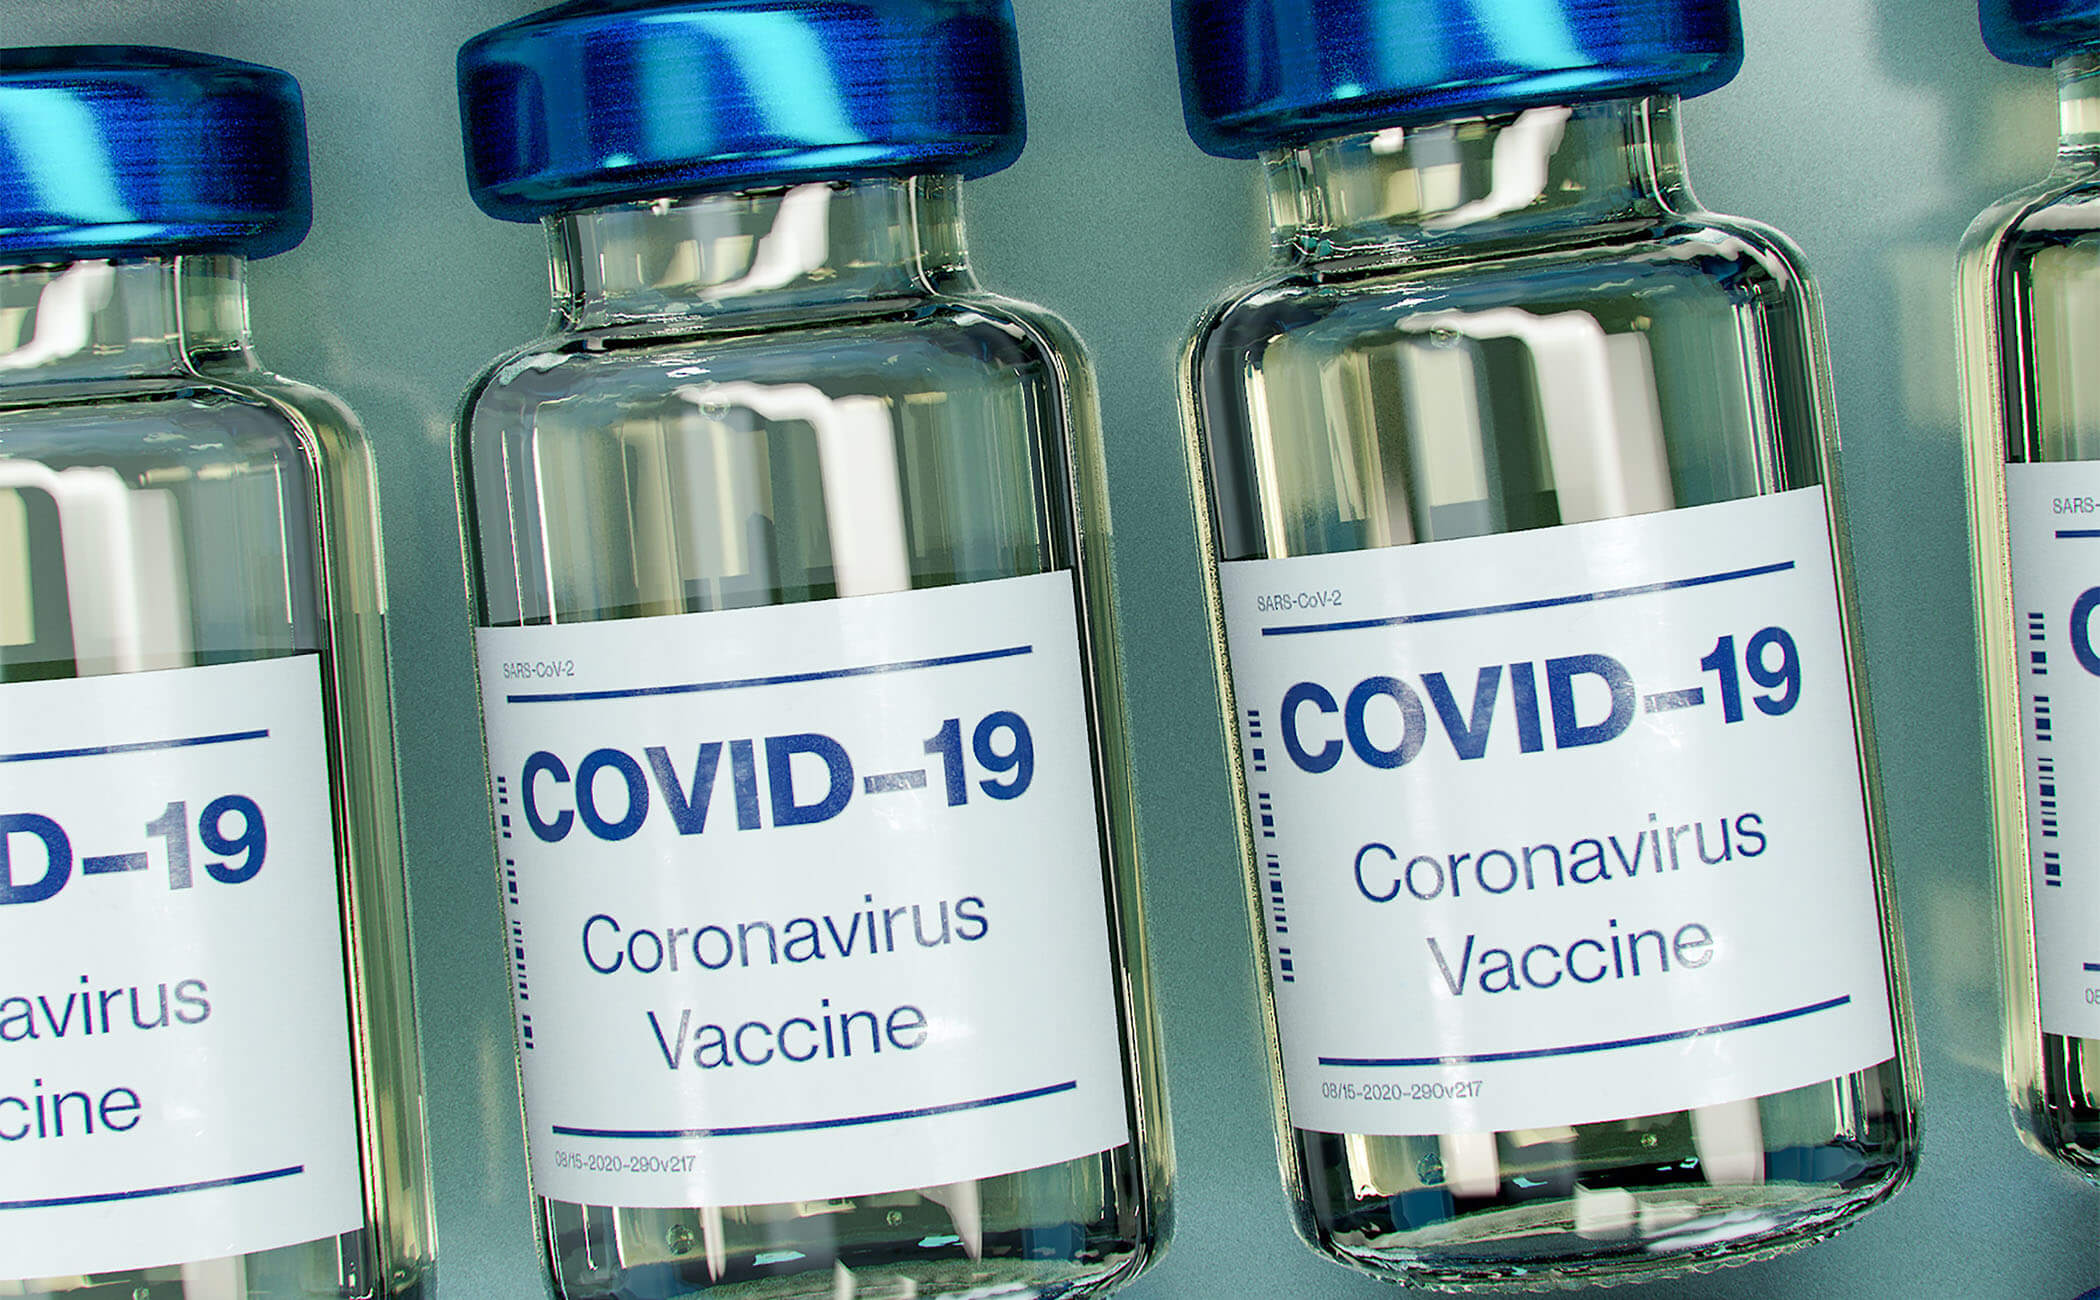 COVID-19 vaccine adoption, vaccination containers